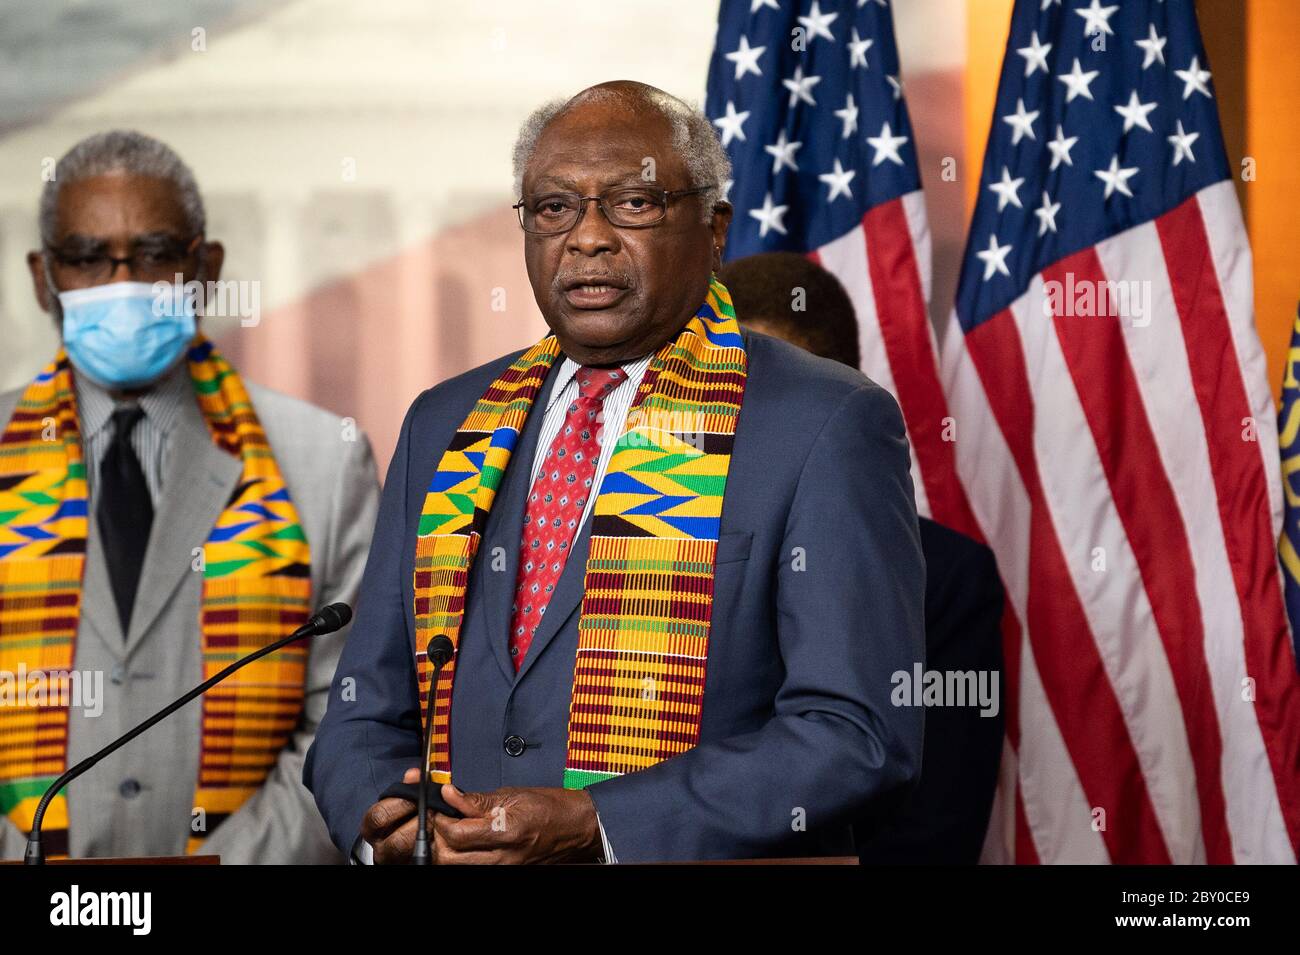 U.S. Representative Jim Clyburn (D-SC)  speaks during a press conference with Congressional Democrats unveiling policing reform and equal justice legislation in Washington. Stock Photo